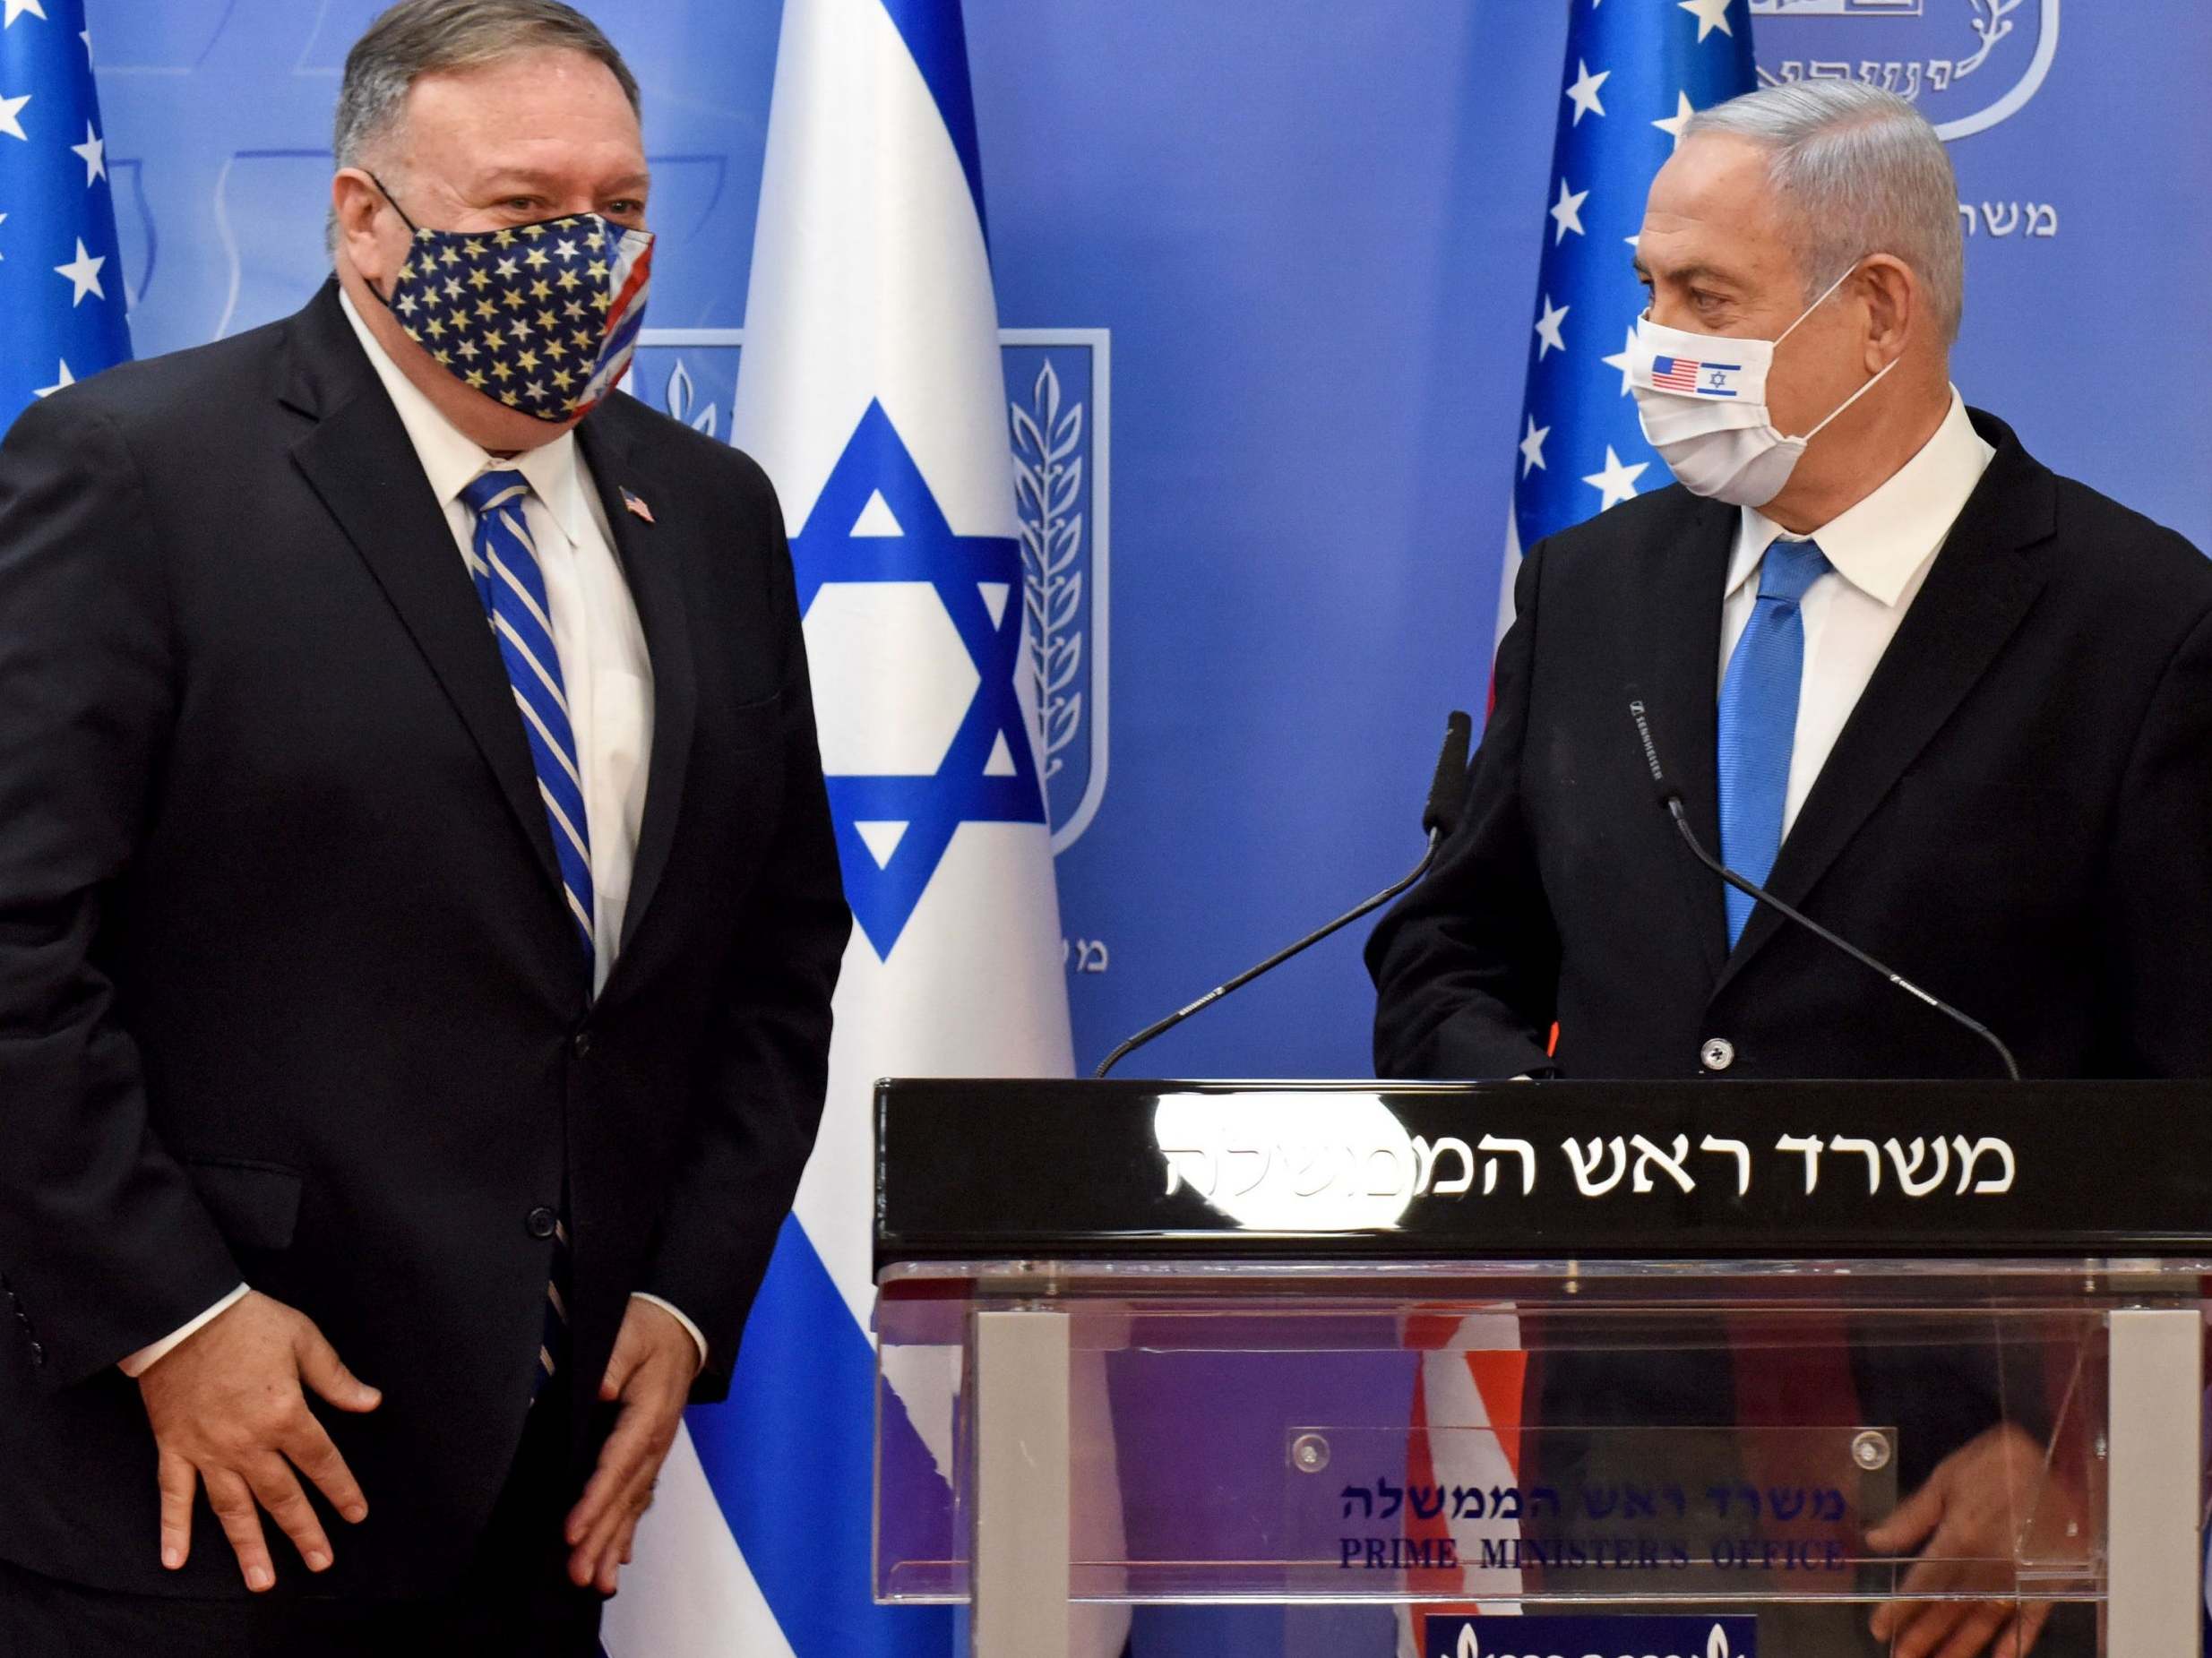 US Secretary of State Mike Pompeo with Israeli PM Benjamin Netanyahu a tour of the Middle East